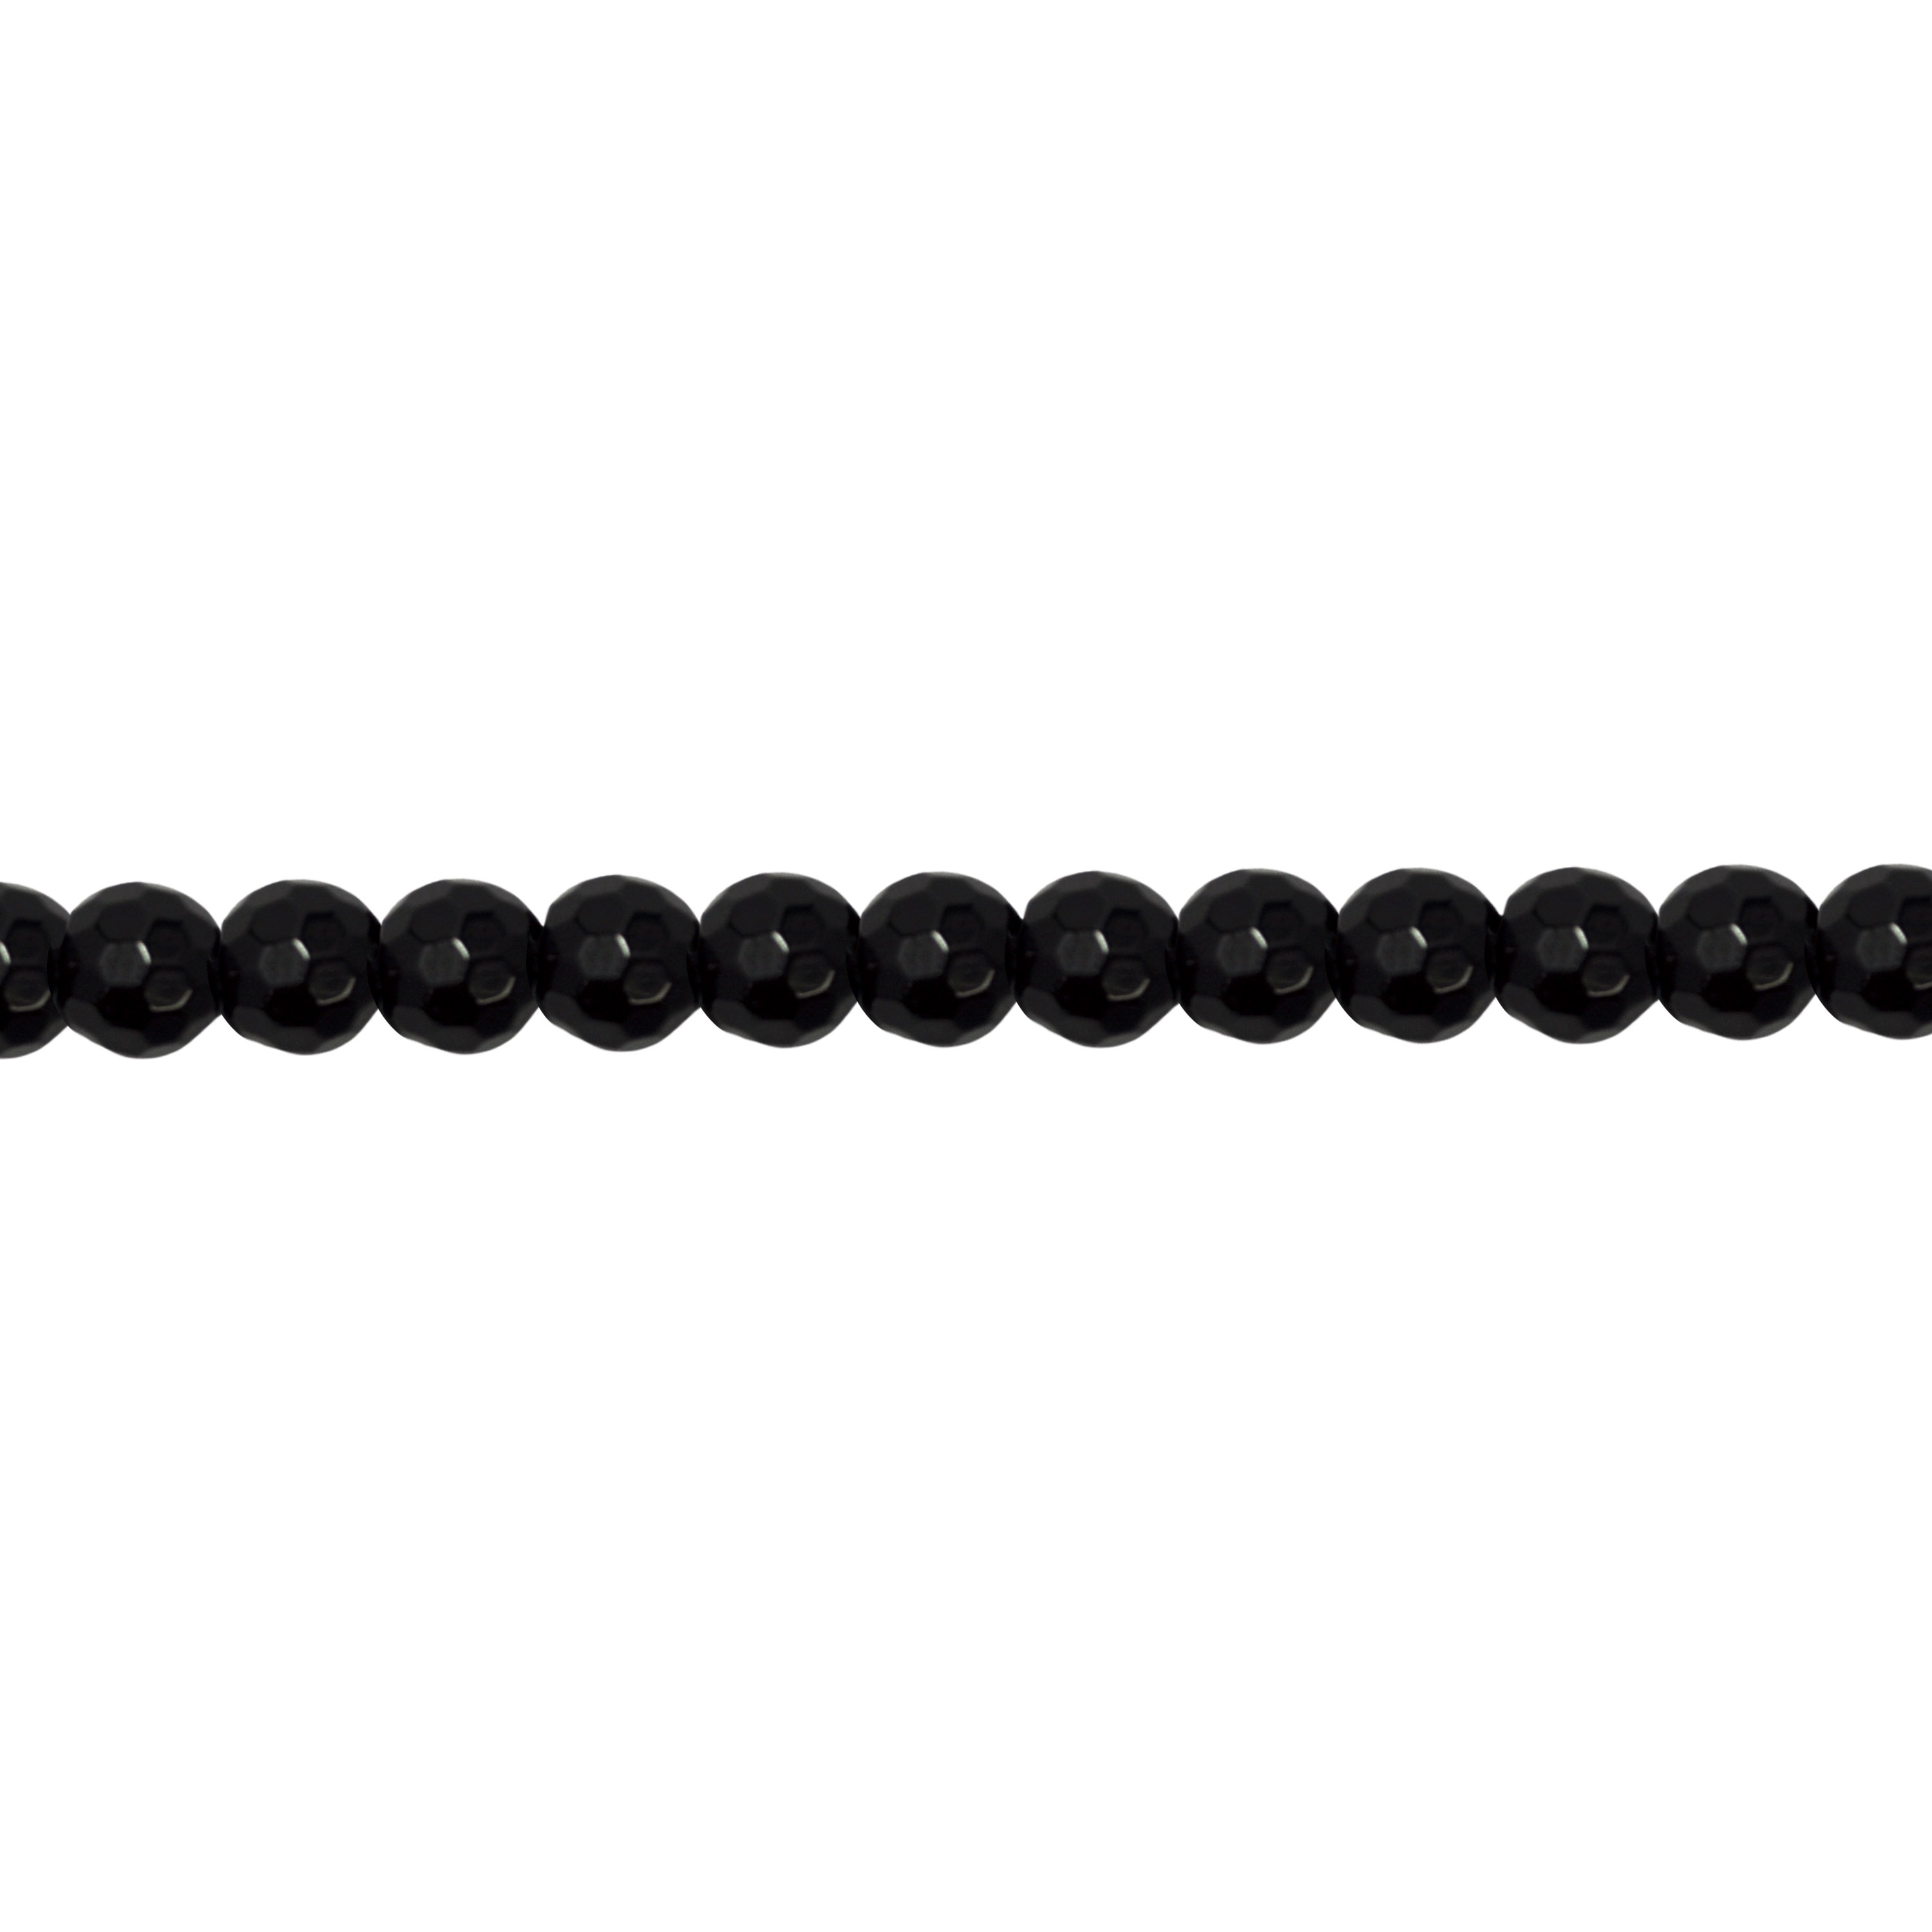 6mm Black Tourmaline - Faceted